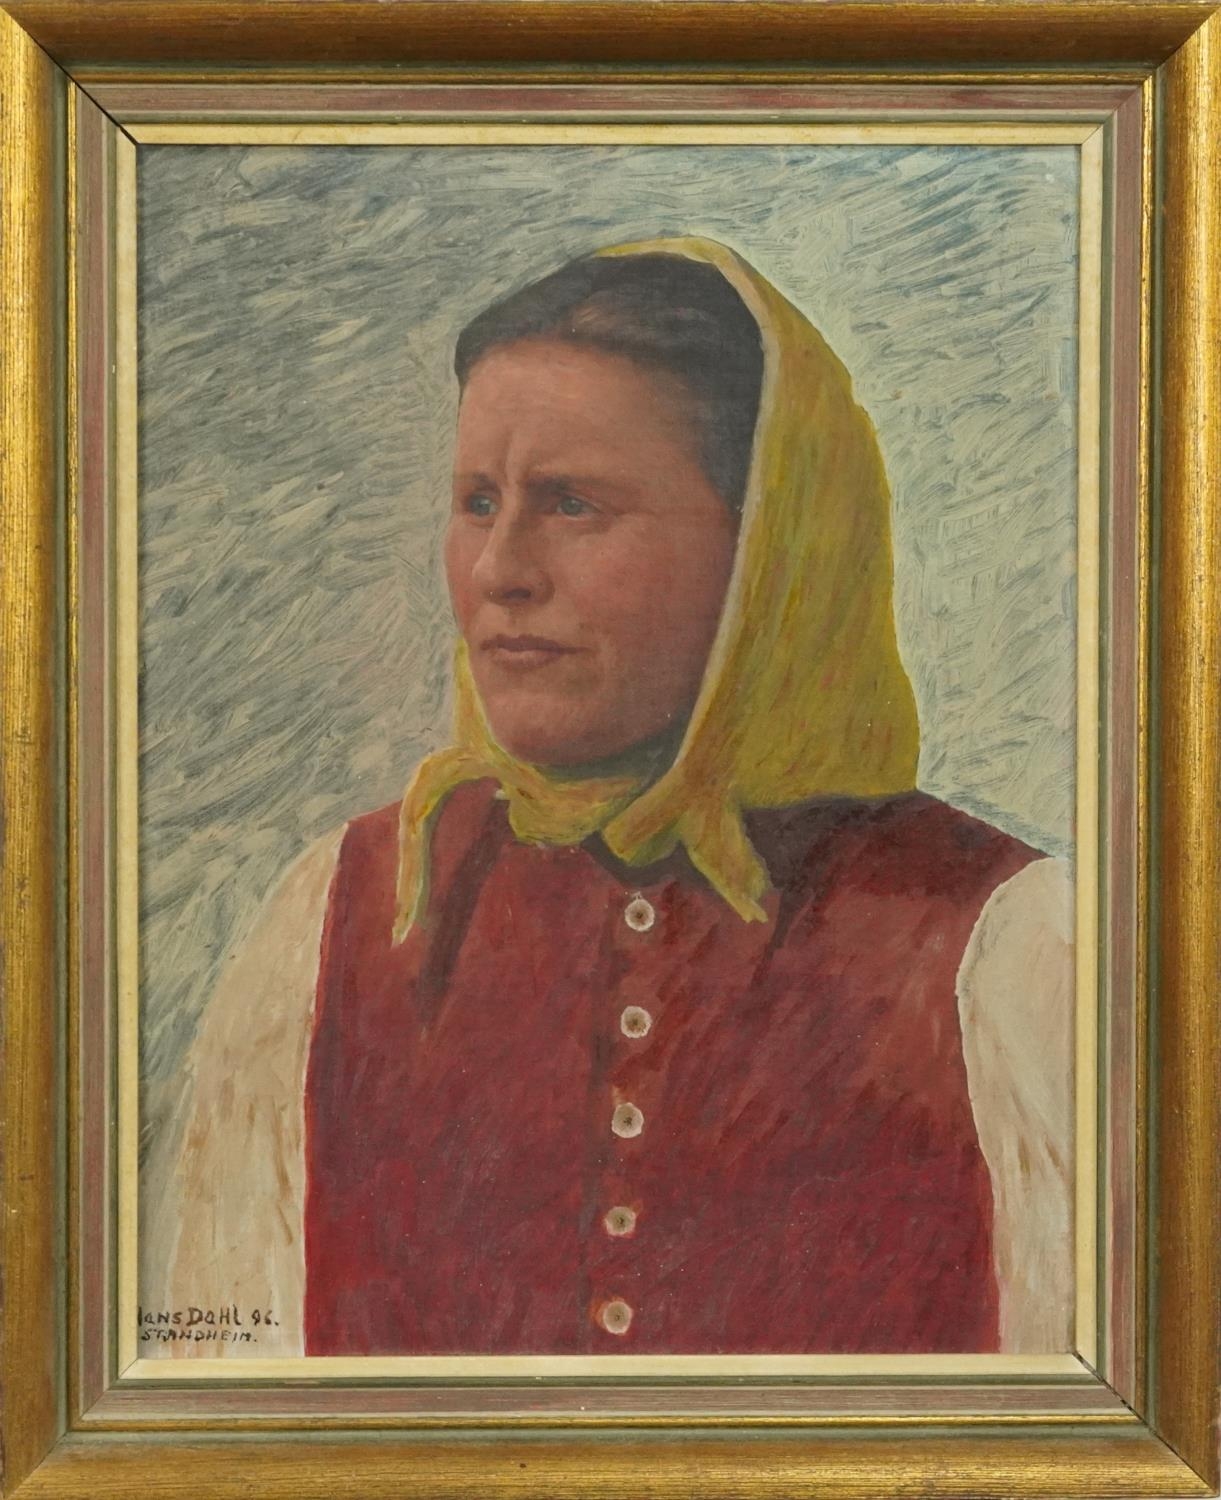 Hans Dahl 1896 - Head and shoulders portrait of a female, late 19th century Norwegian school oil - Image 2 of 6